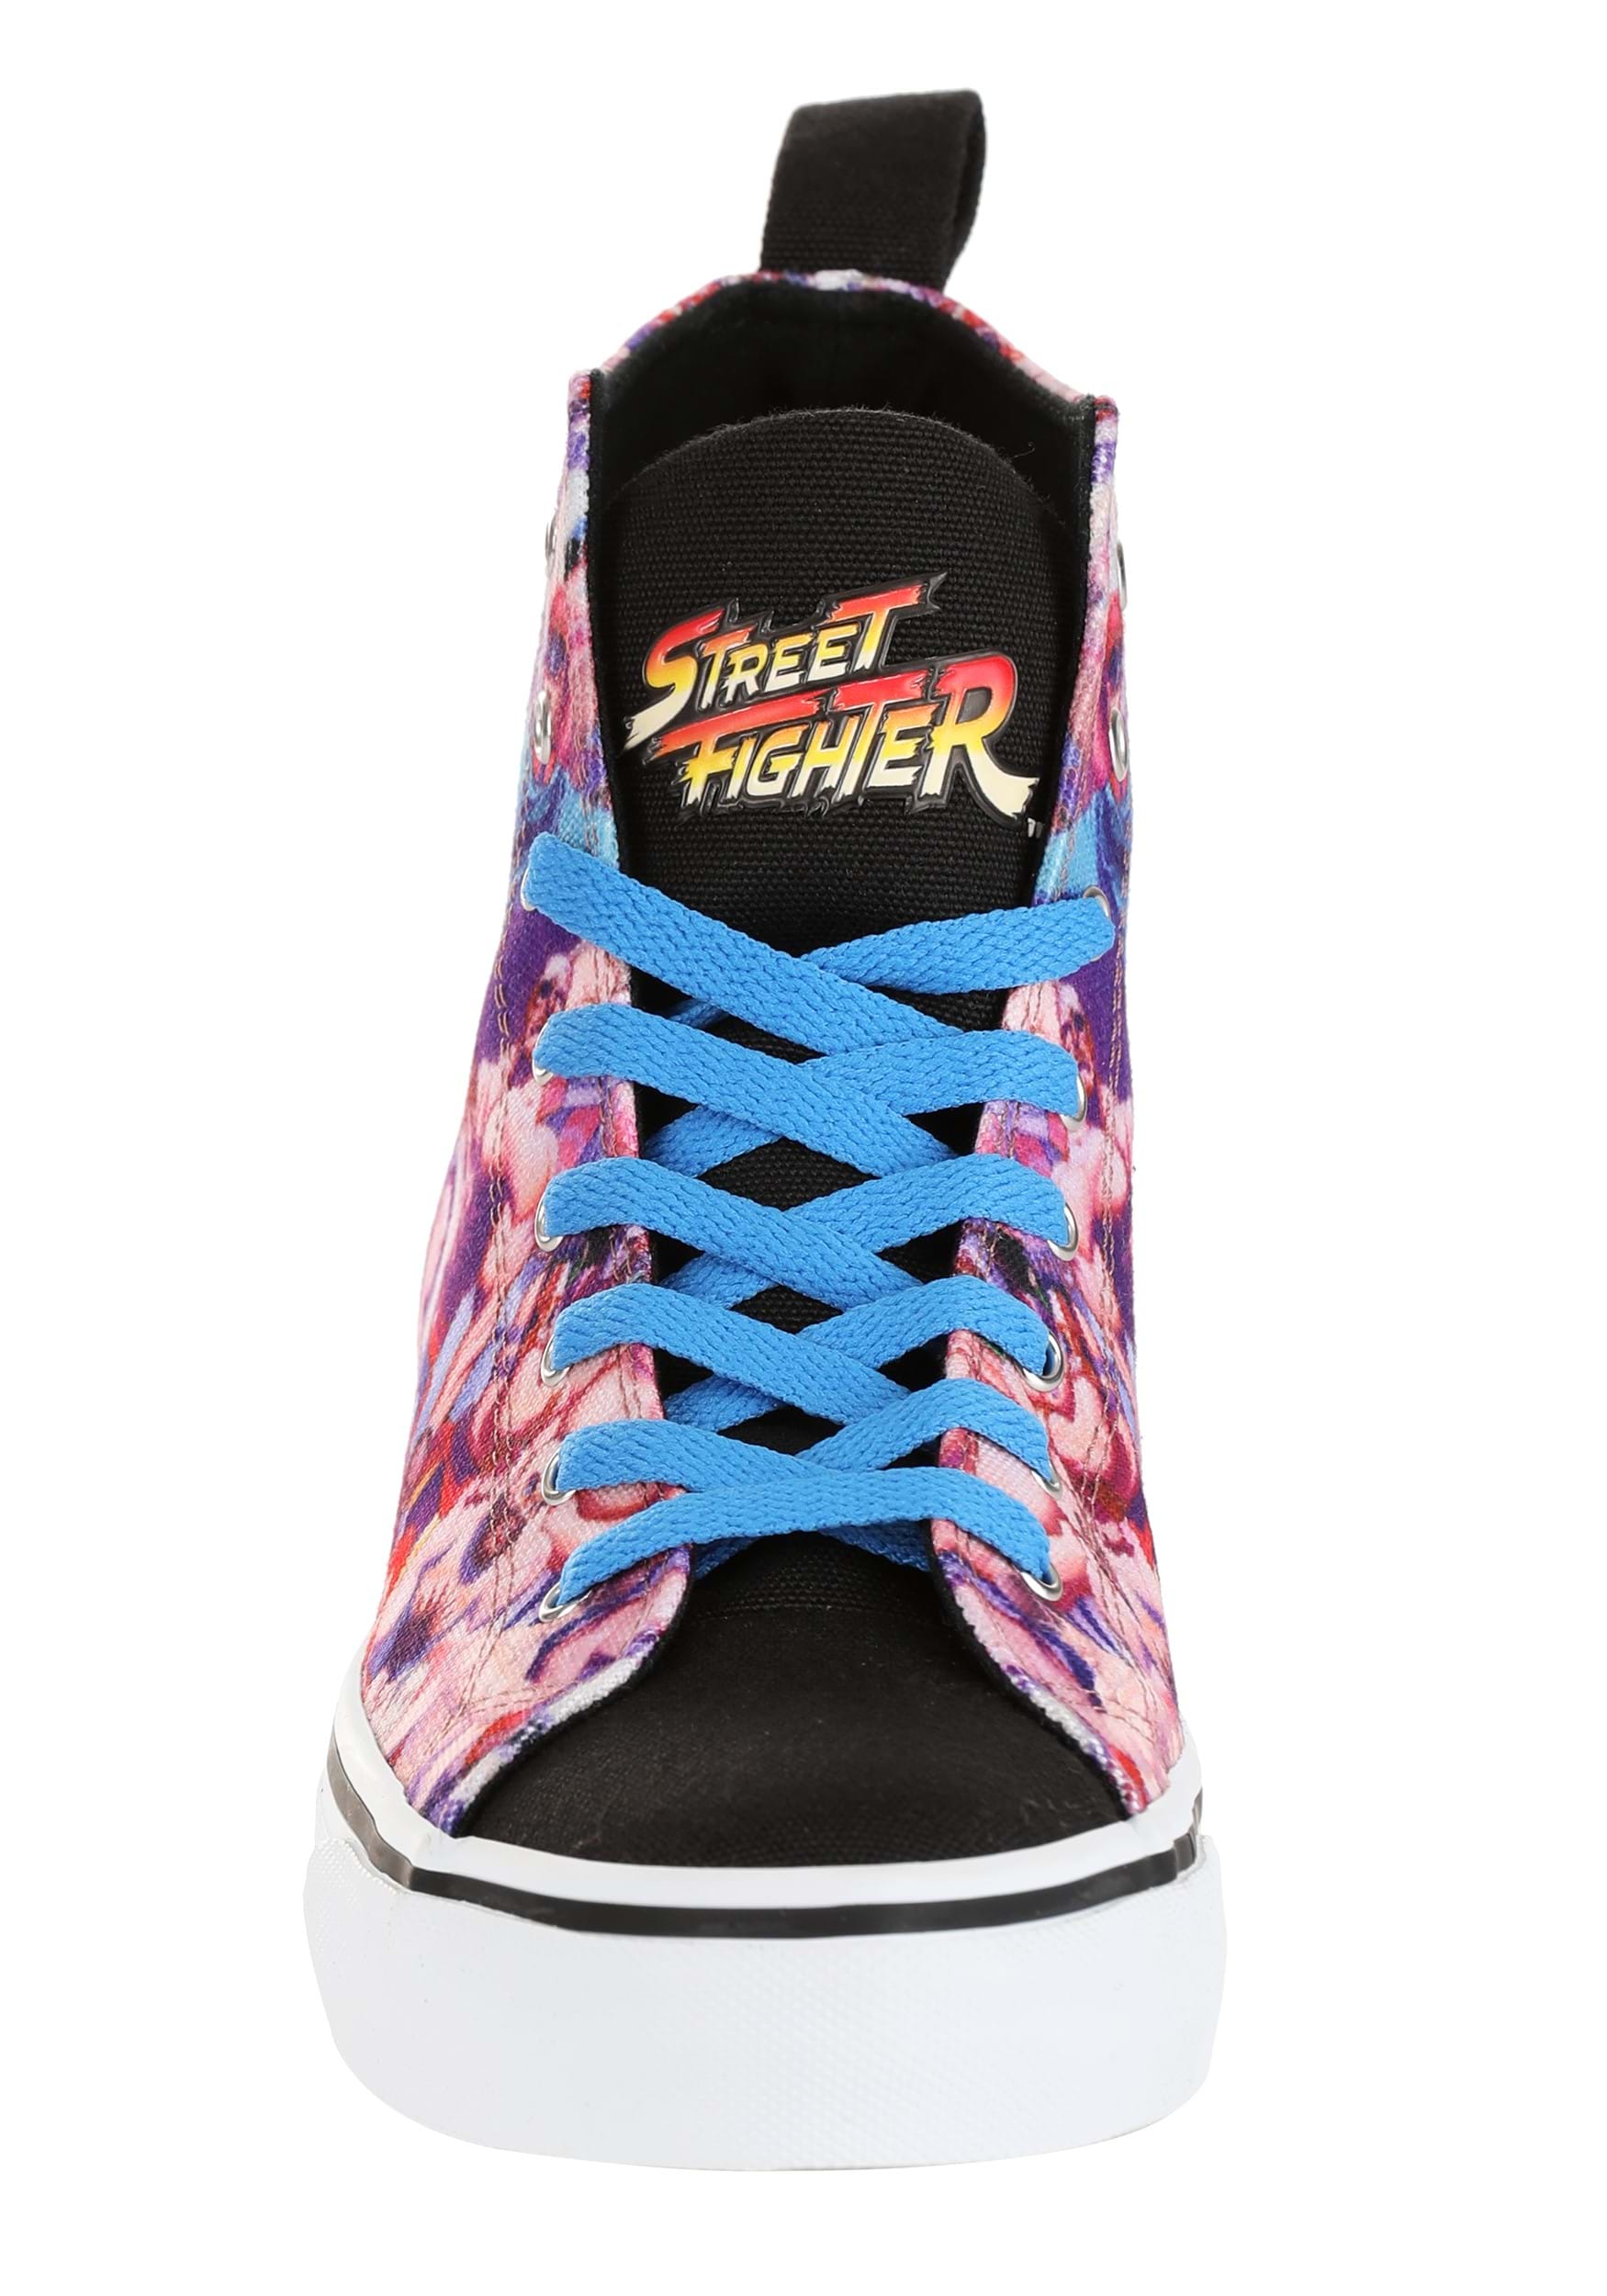 Street Fighter High Top Adult Sneakers